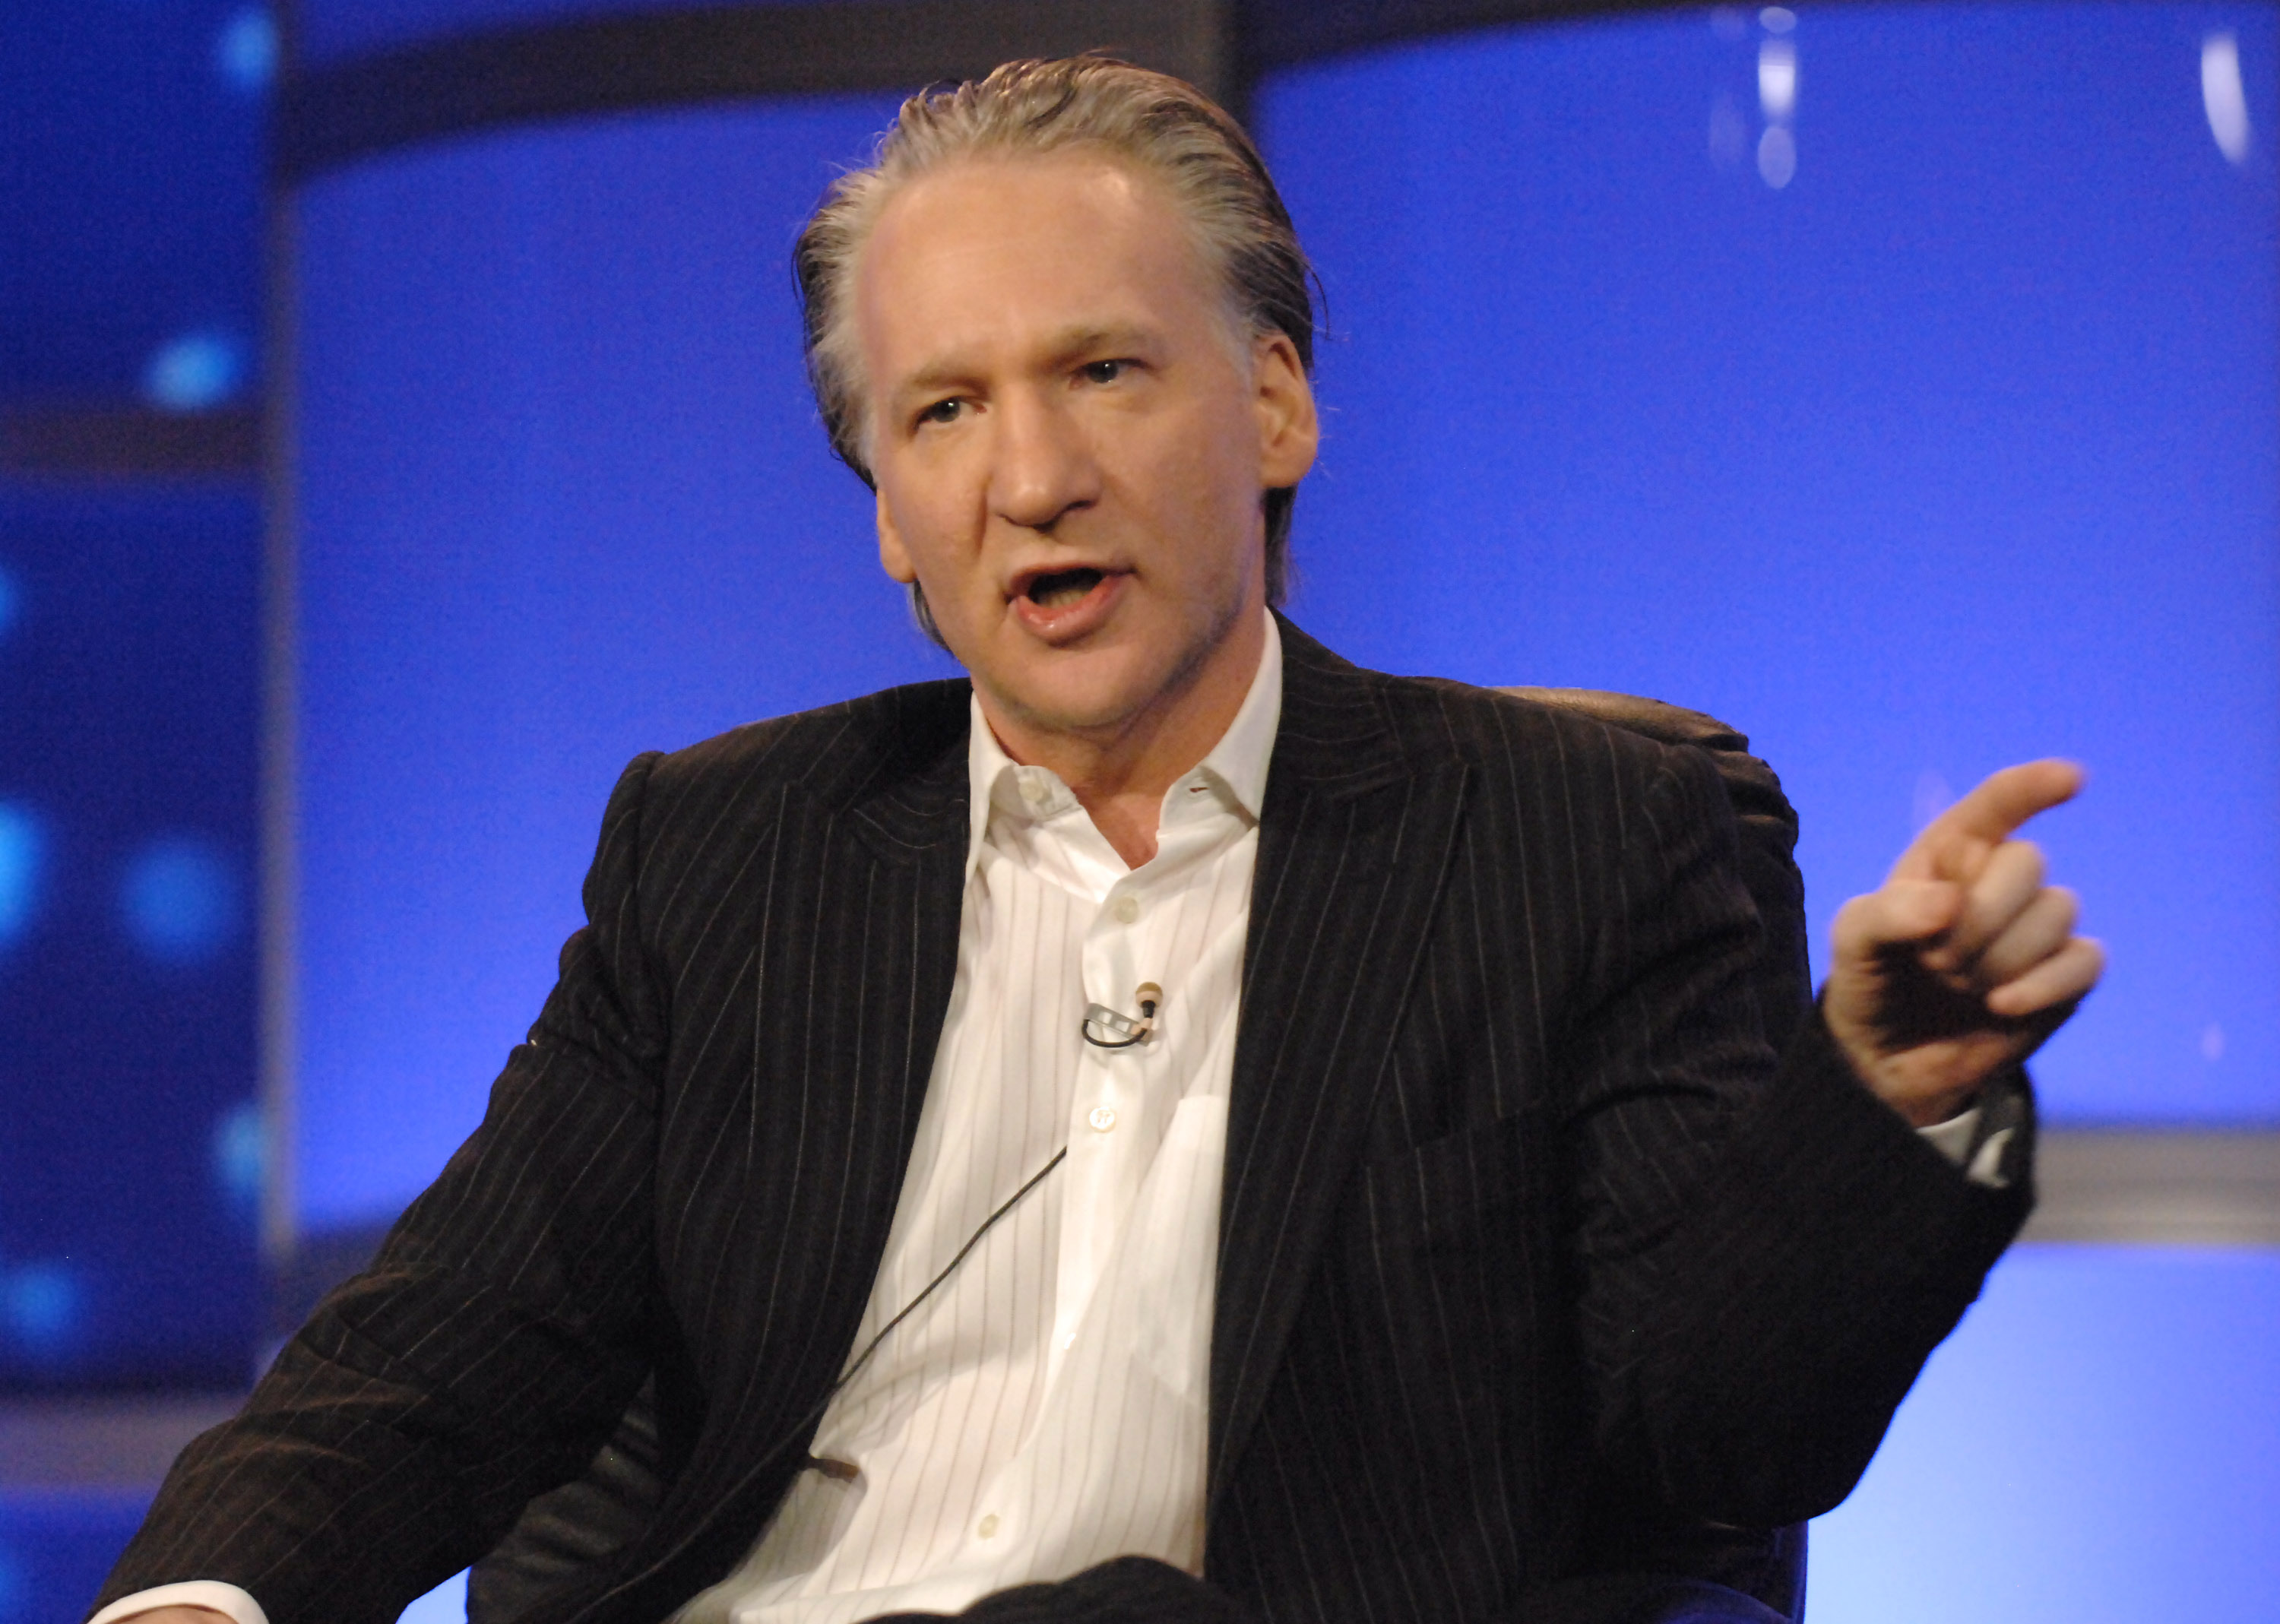 Bill Maher of Real Time with Bill Maher during HBO Winter 2007 TCA Press Tour in Los Angeles, California, United States. (Photo by Jeff Kravitz/FilmMagic, Inc for HBO Films) (Jeff Kravitz&mdash;FilmMagic, Inc for HBO Films)